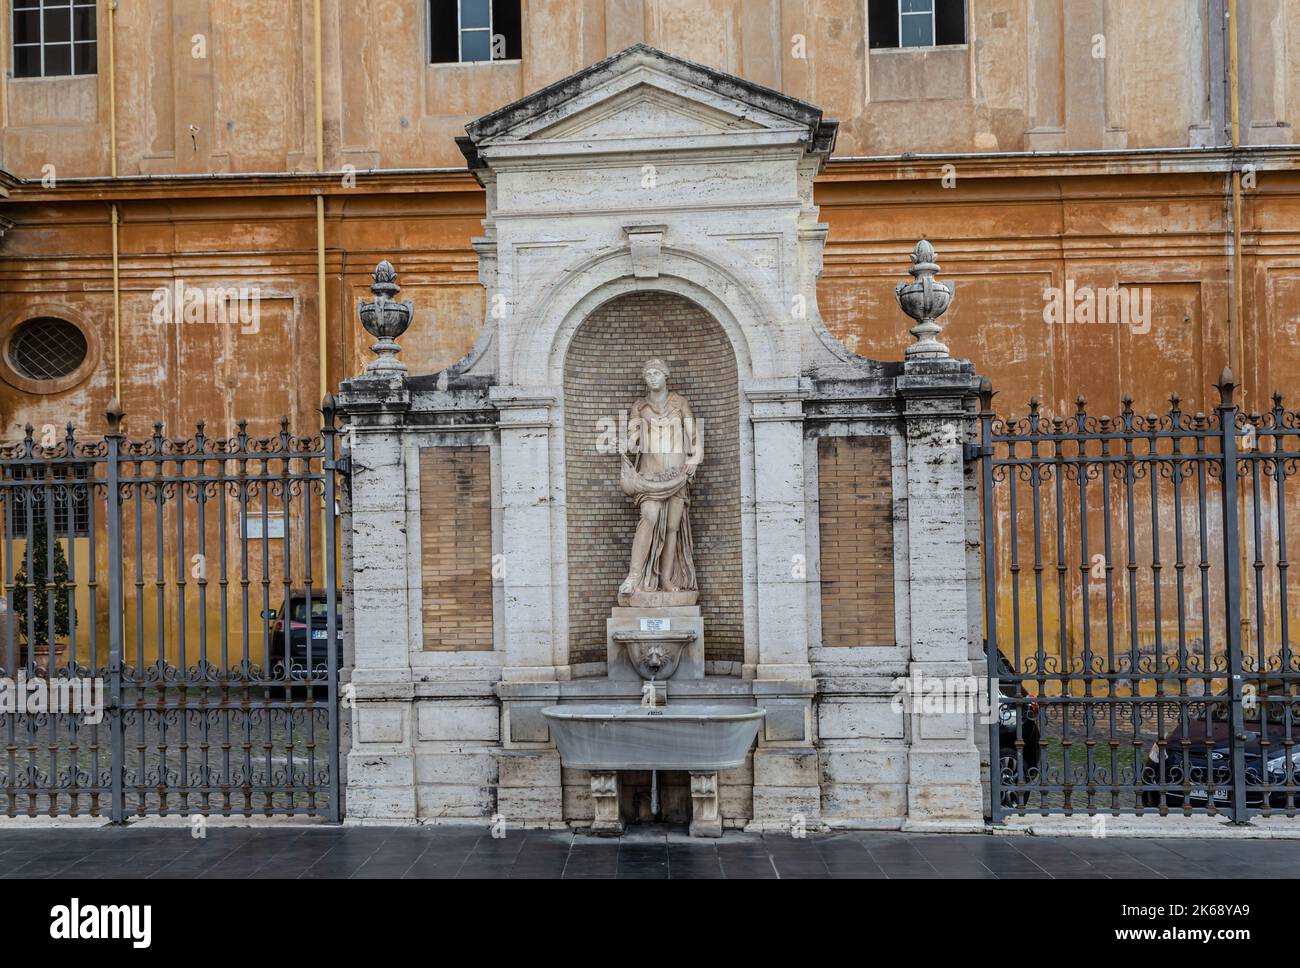 ROME, ITALY - DECEMBER 05, 2019:  Fountain in the inner courtyard of the Vatican Museum in Rome, Italy Stock Photo